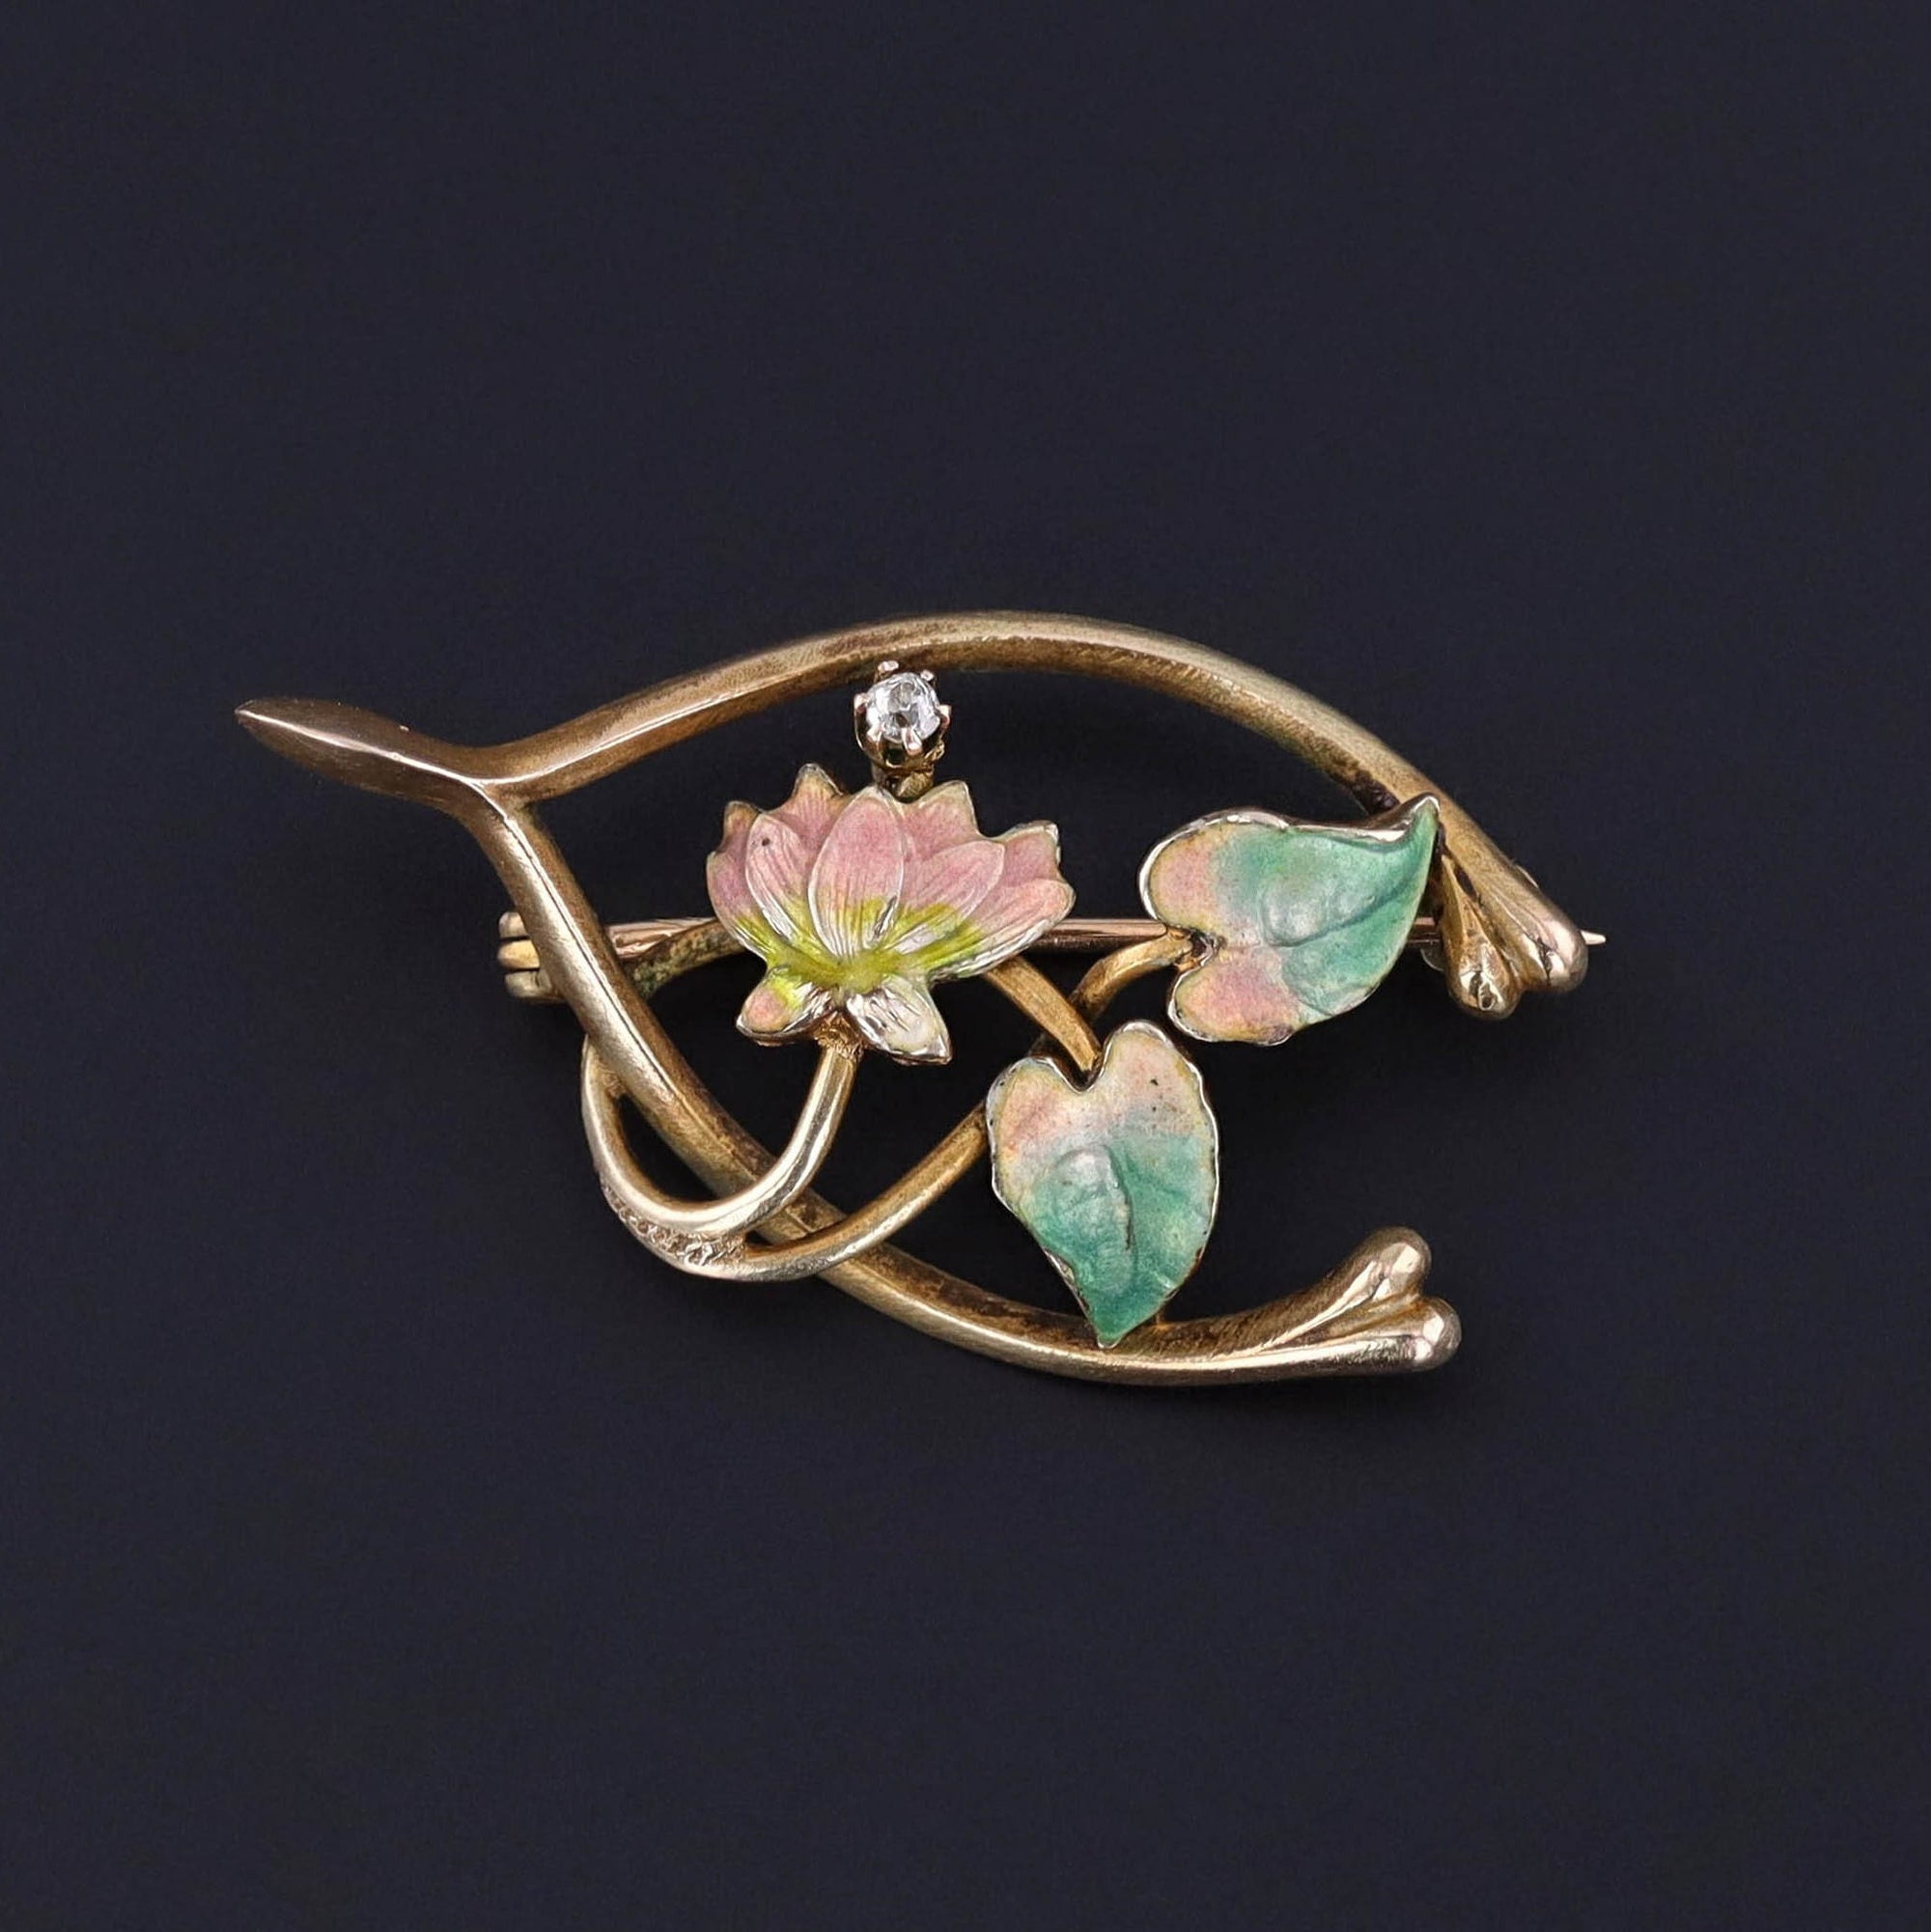 An antique 14k gold enamel and diamond wishbone brooch adorned with a lily flower. The brooch dates to the early 1900s (circa 1910) and is in great condition.